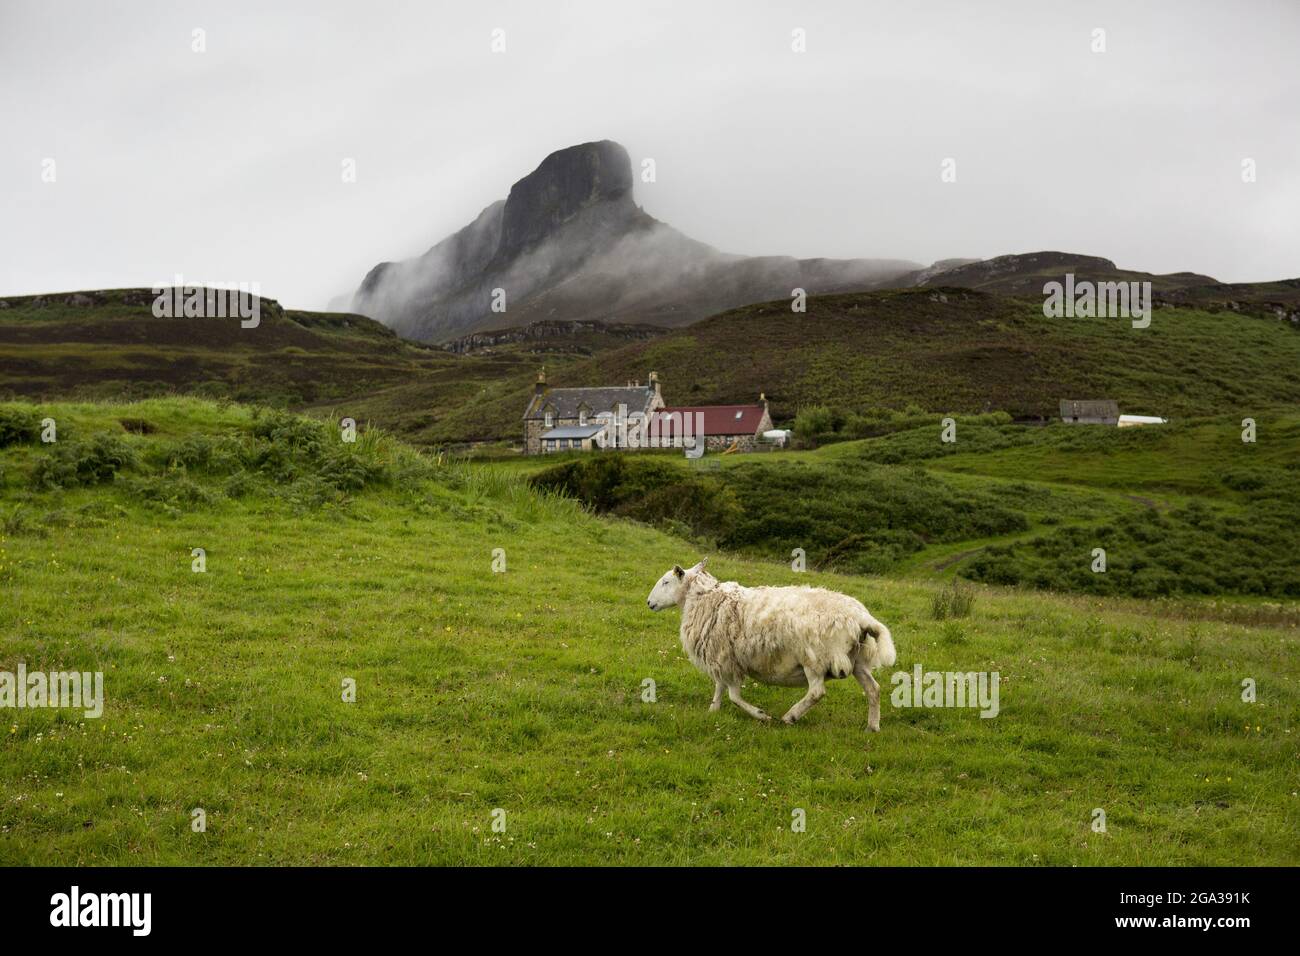 A cottage and lone sheep dot the landscape in front of the peak of An Sgurr, Isle of Eigg, Scotland; Isle of Eigg, Scotland Stock Photo